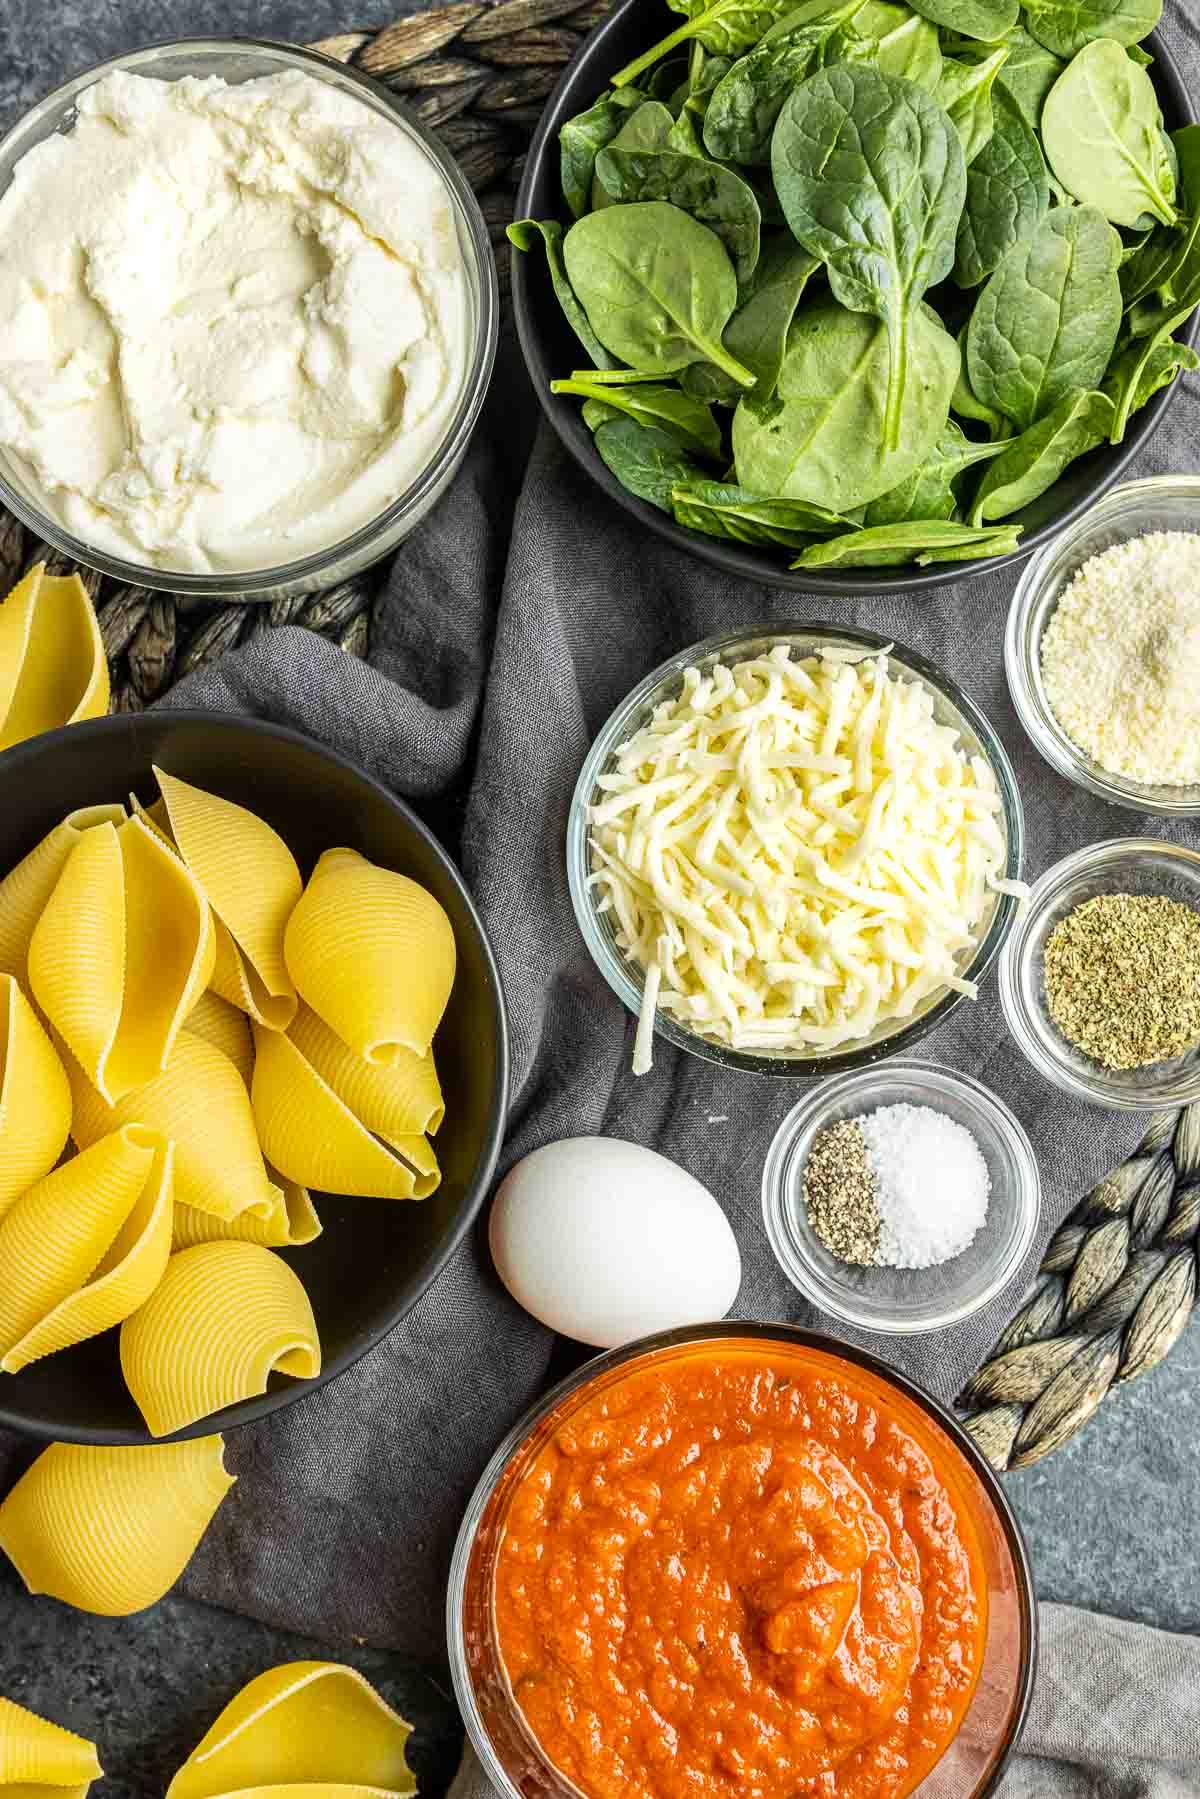 ingredients to make Spinach and Ricotta Stuffed Shells